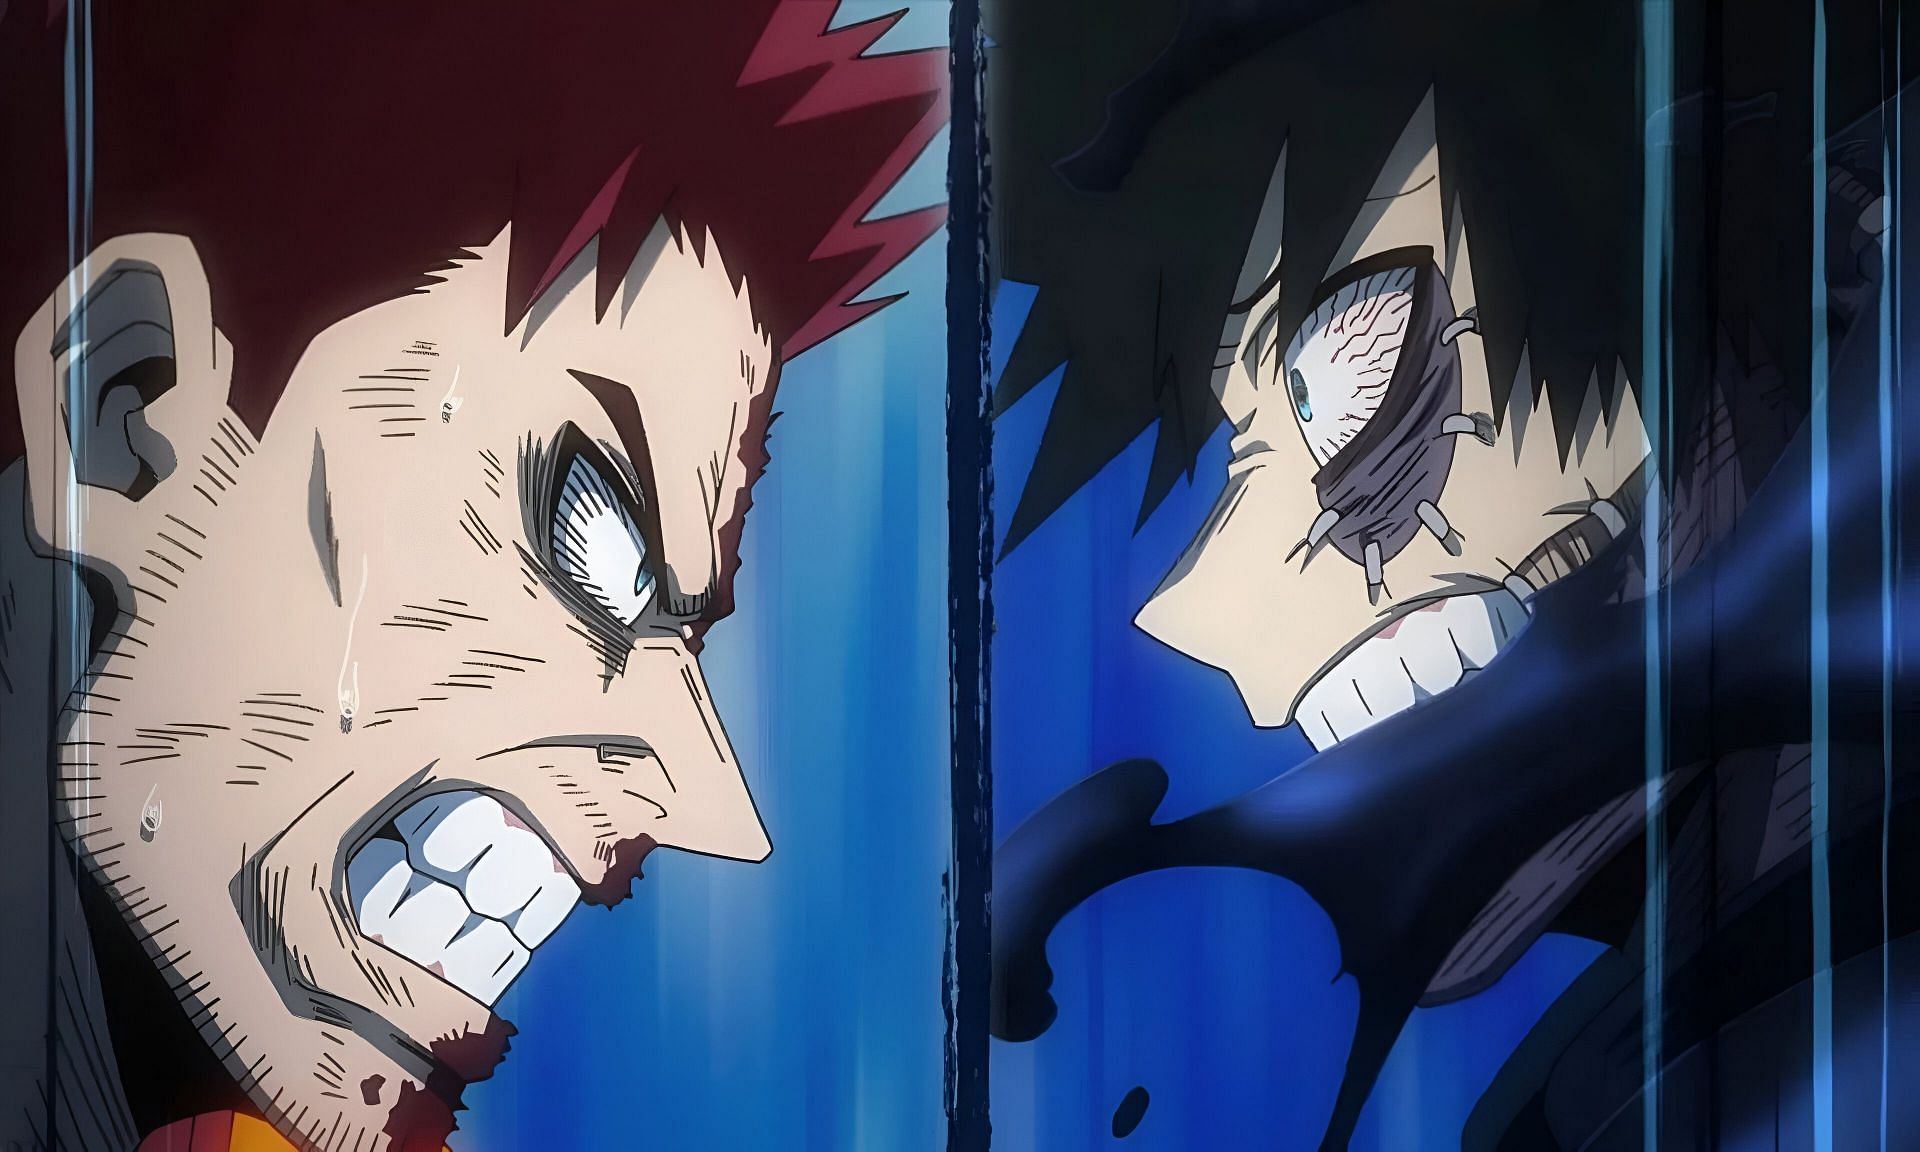 Endeavor (left) and Dabi (right) as seen in the anime (Image via Bones)